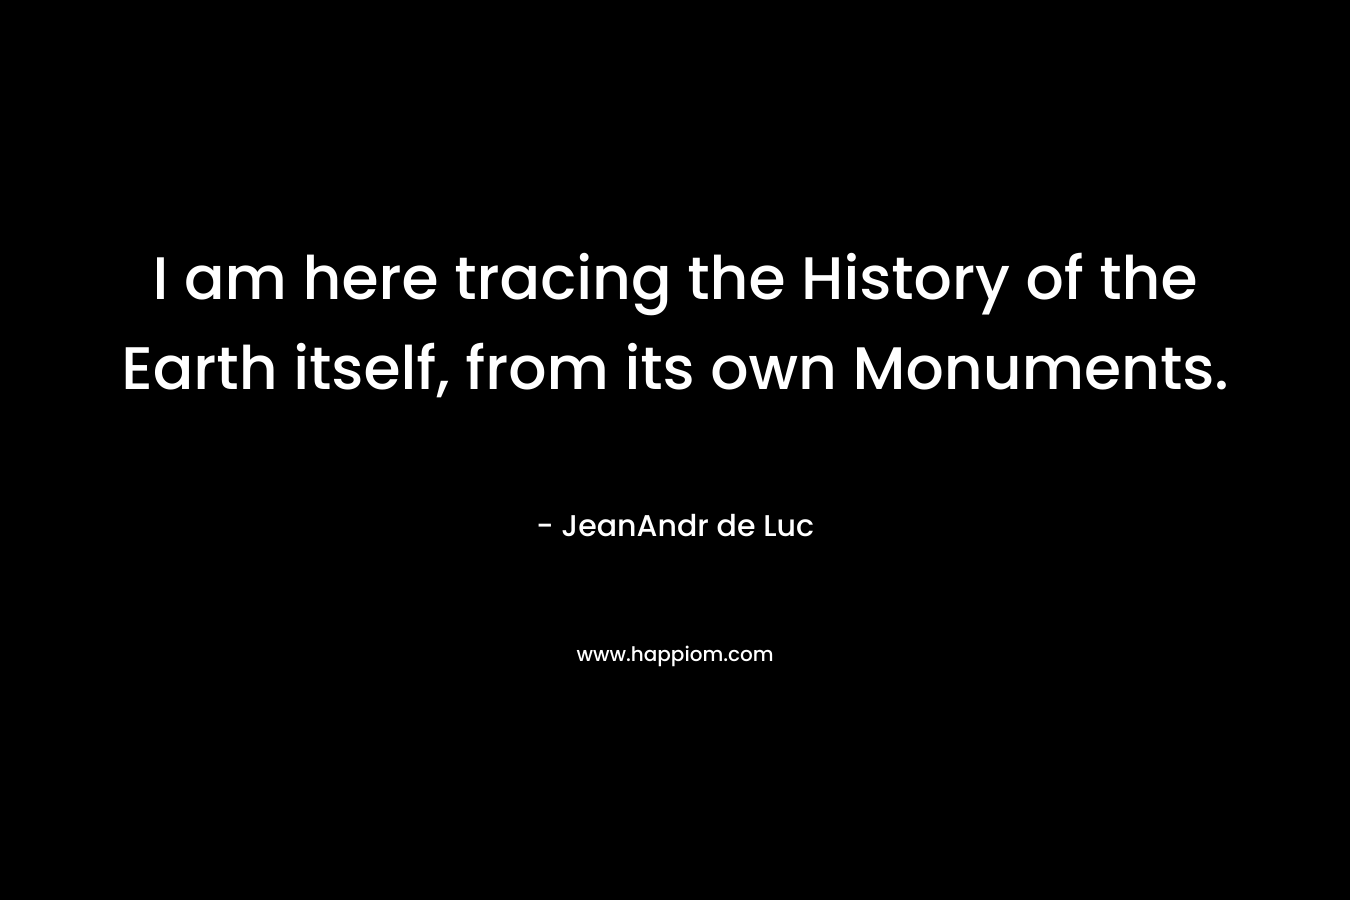 I am here tracing the History of the Earth itself, from its own Monuments. – JeanAndr de Luc